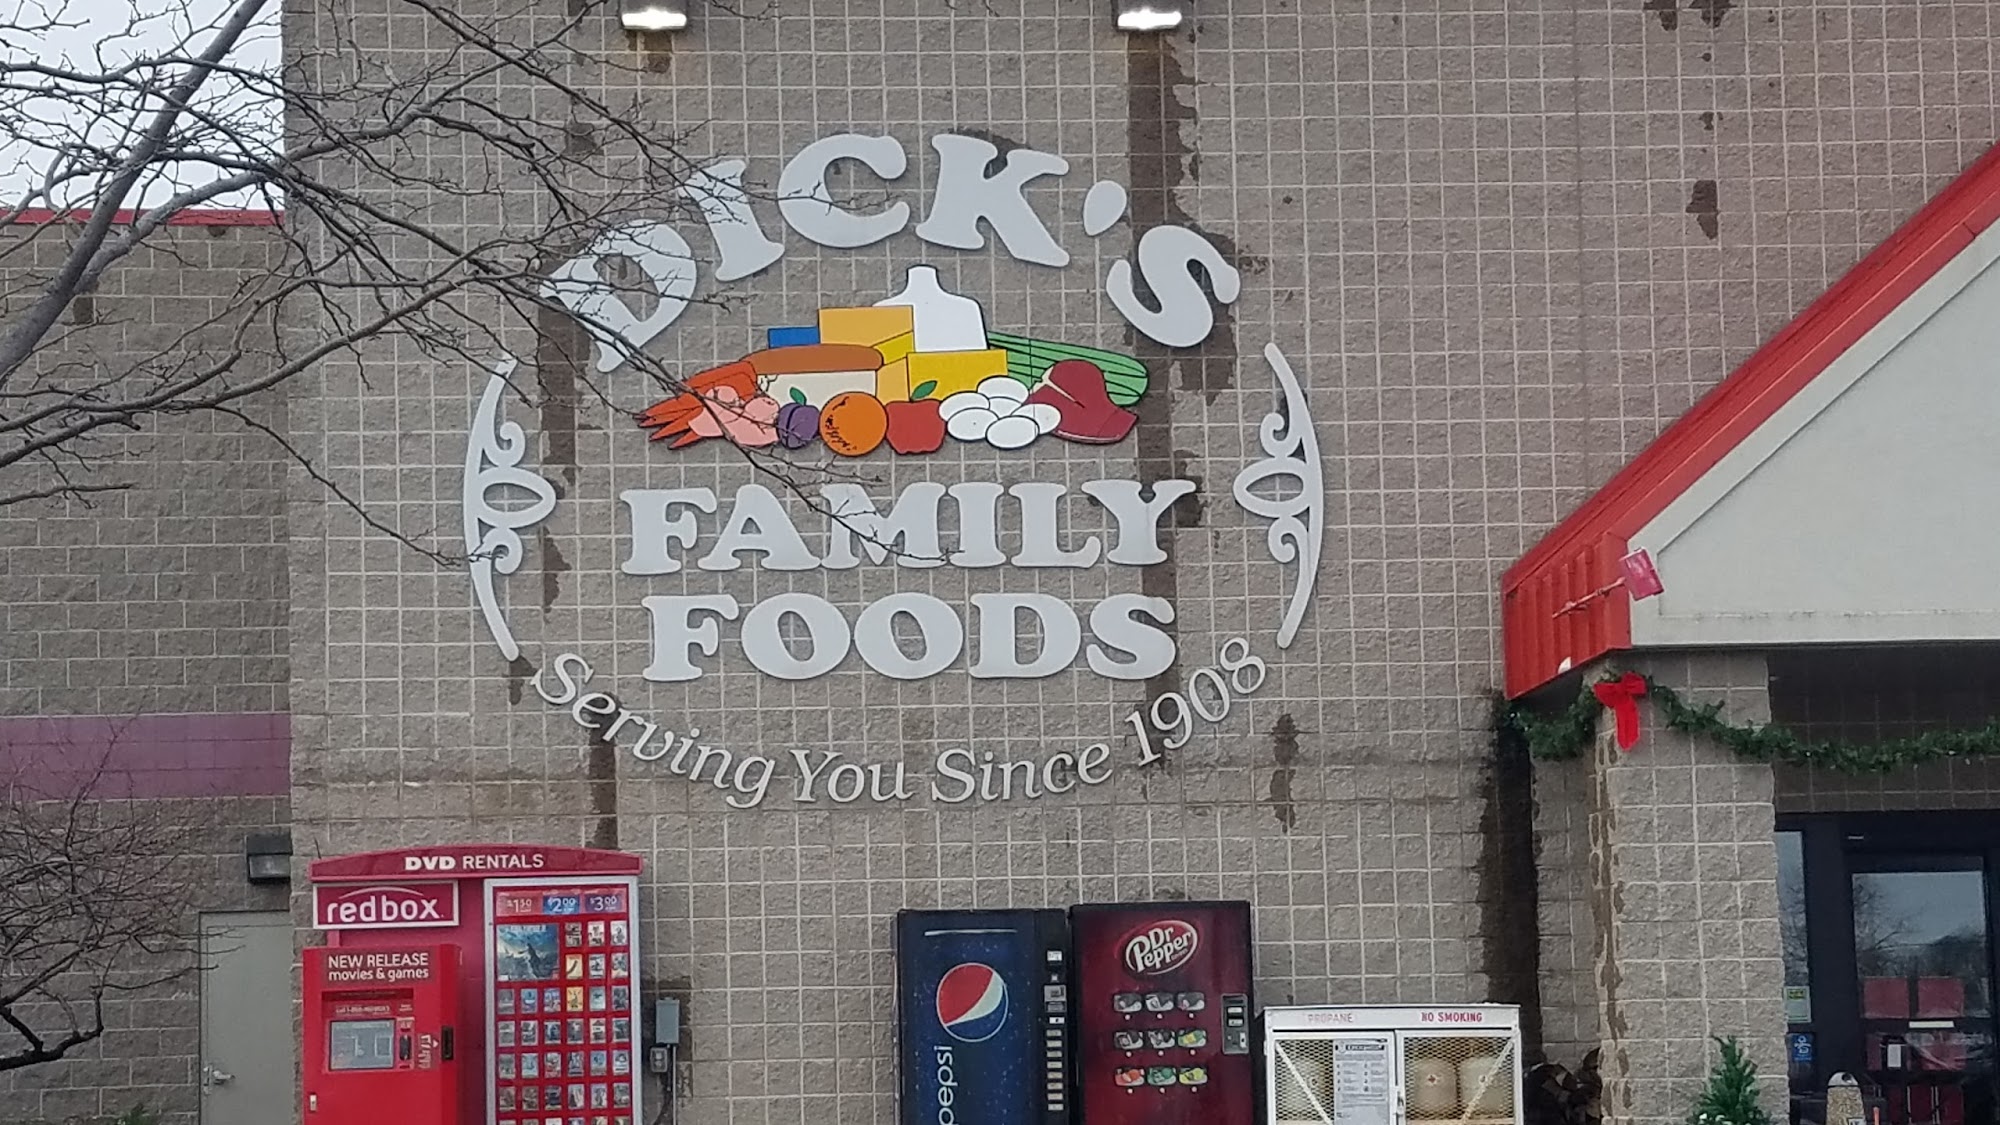 Dick's Family Foods - Wrightstown